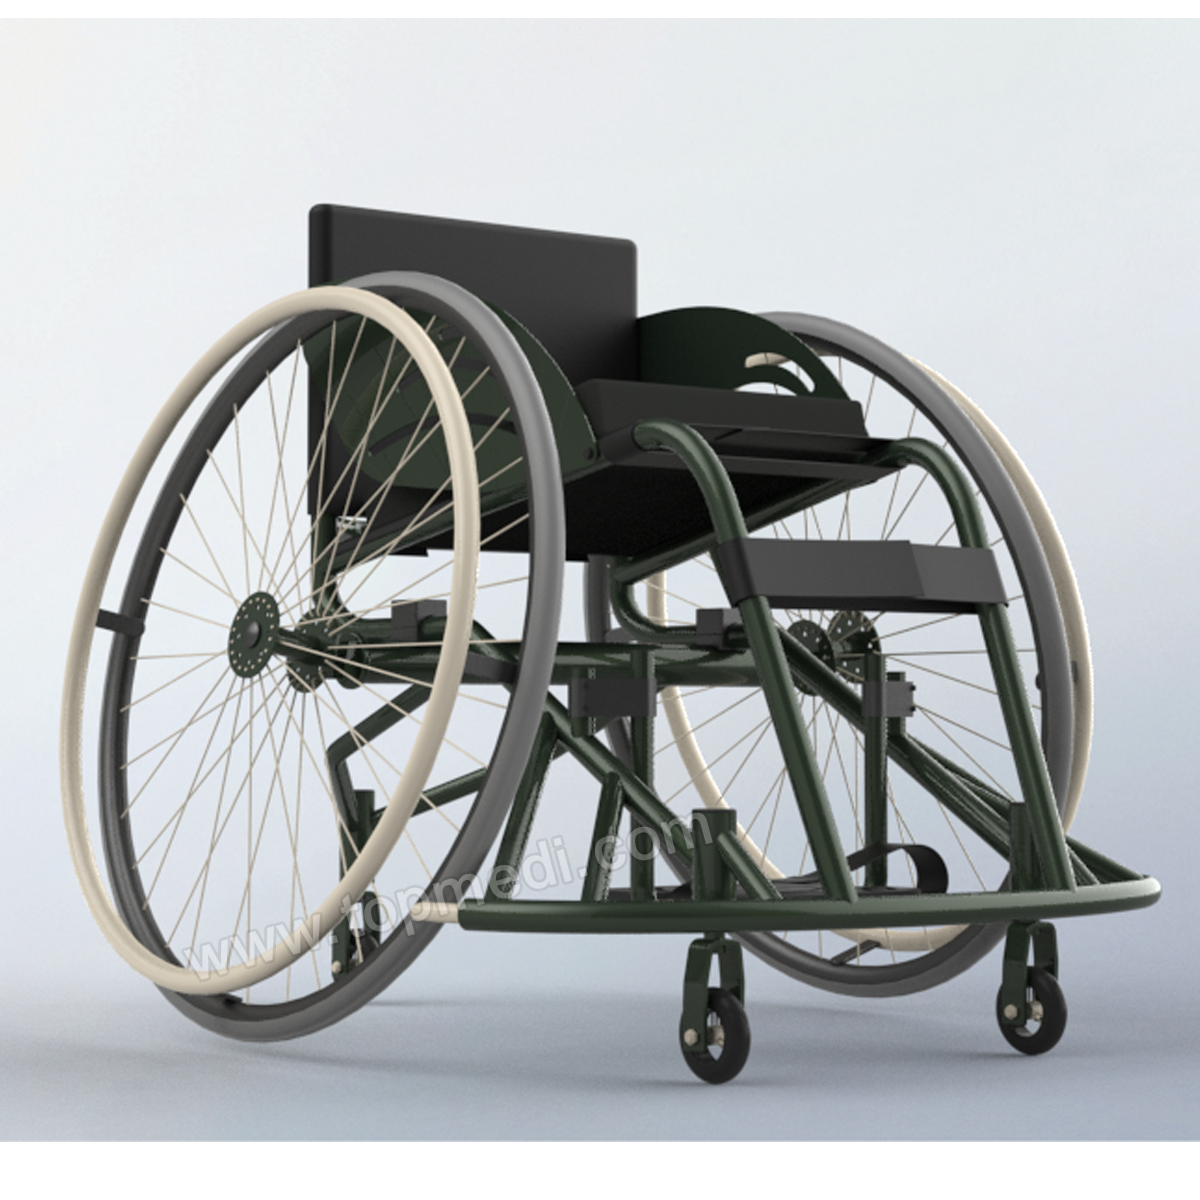 Is the wheelchair the bigger the better?